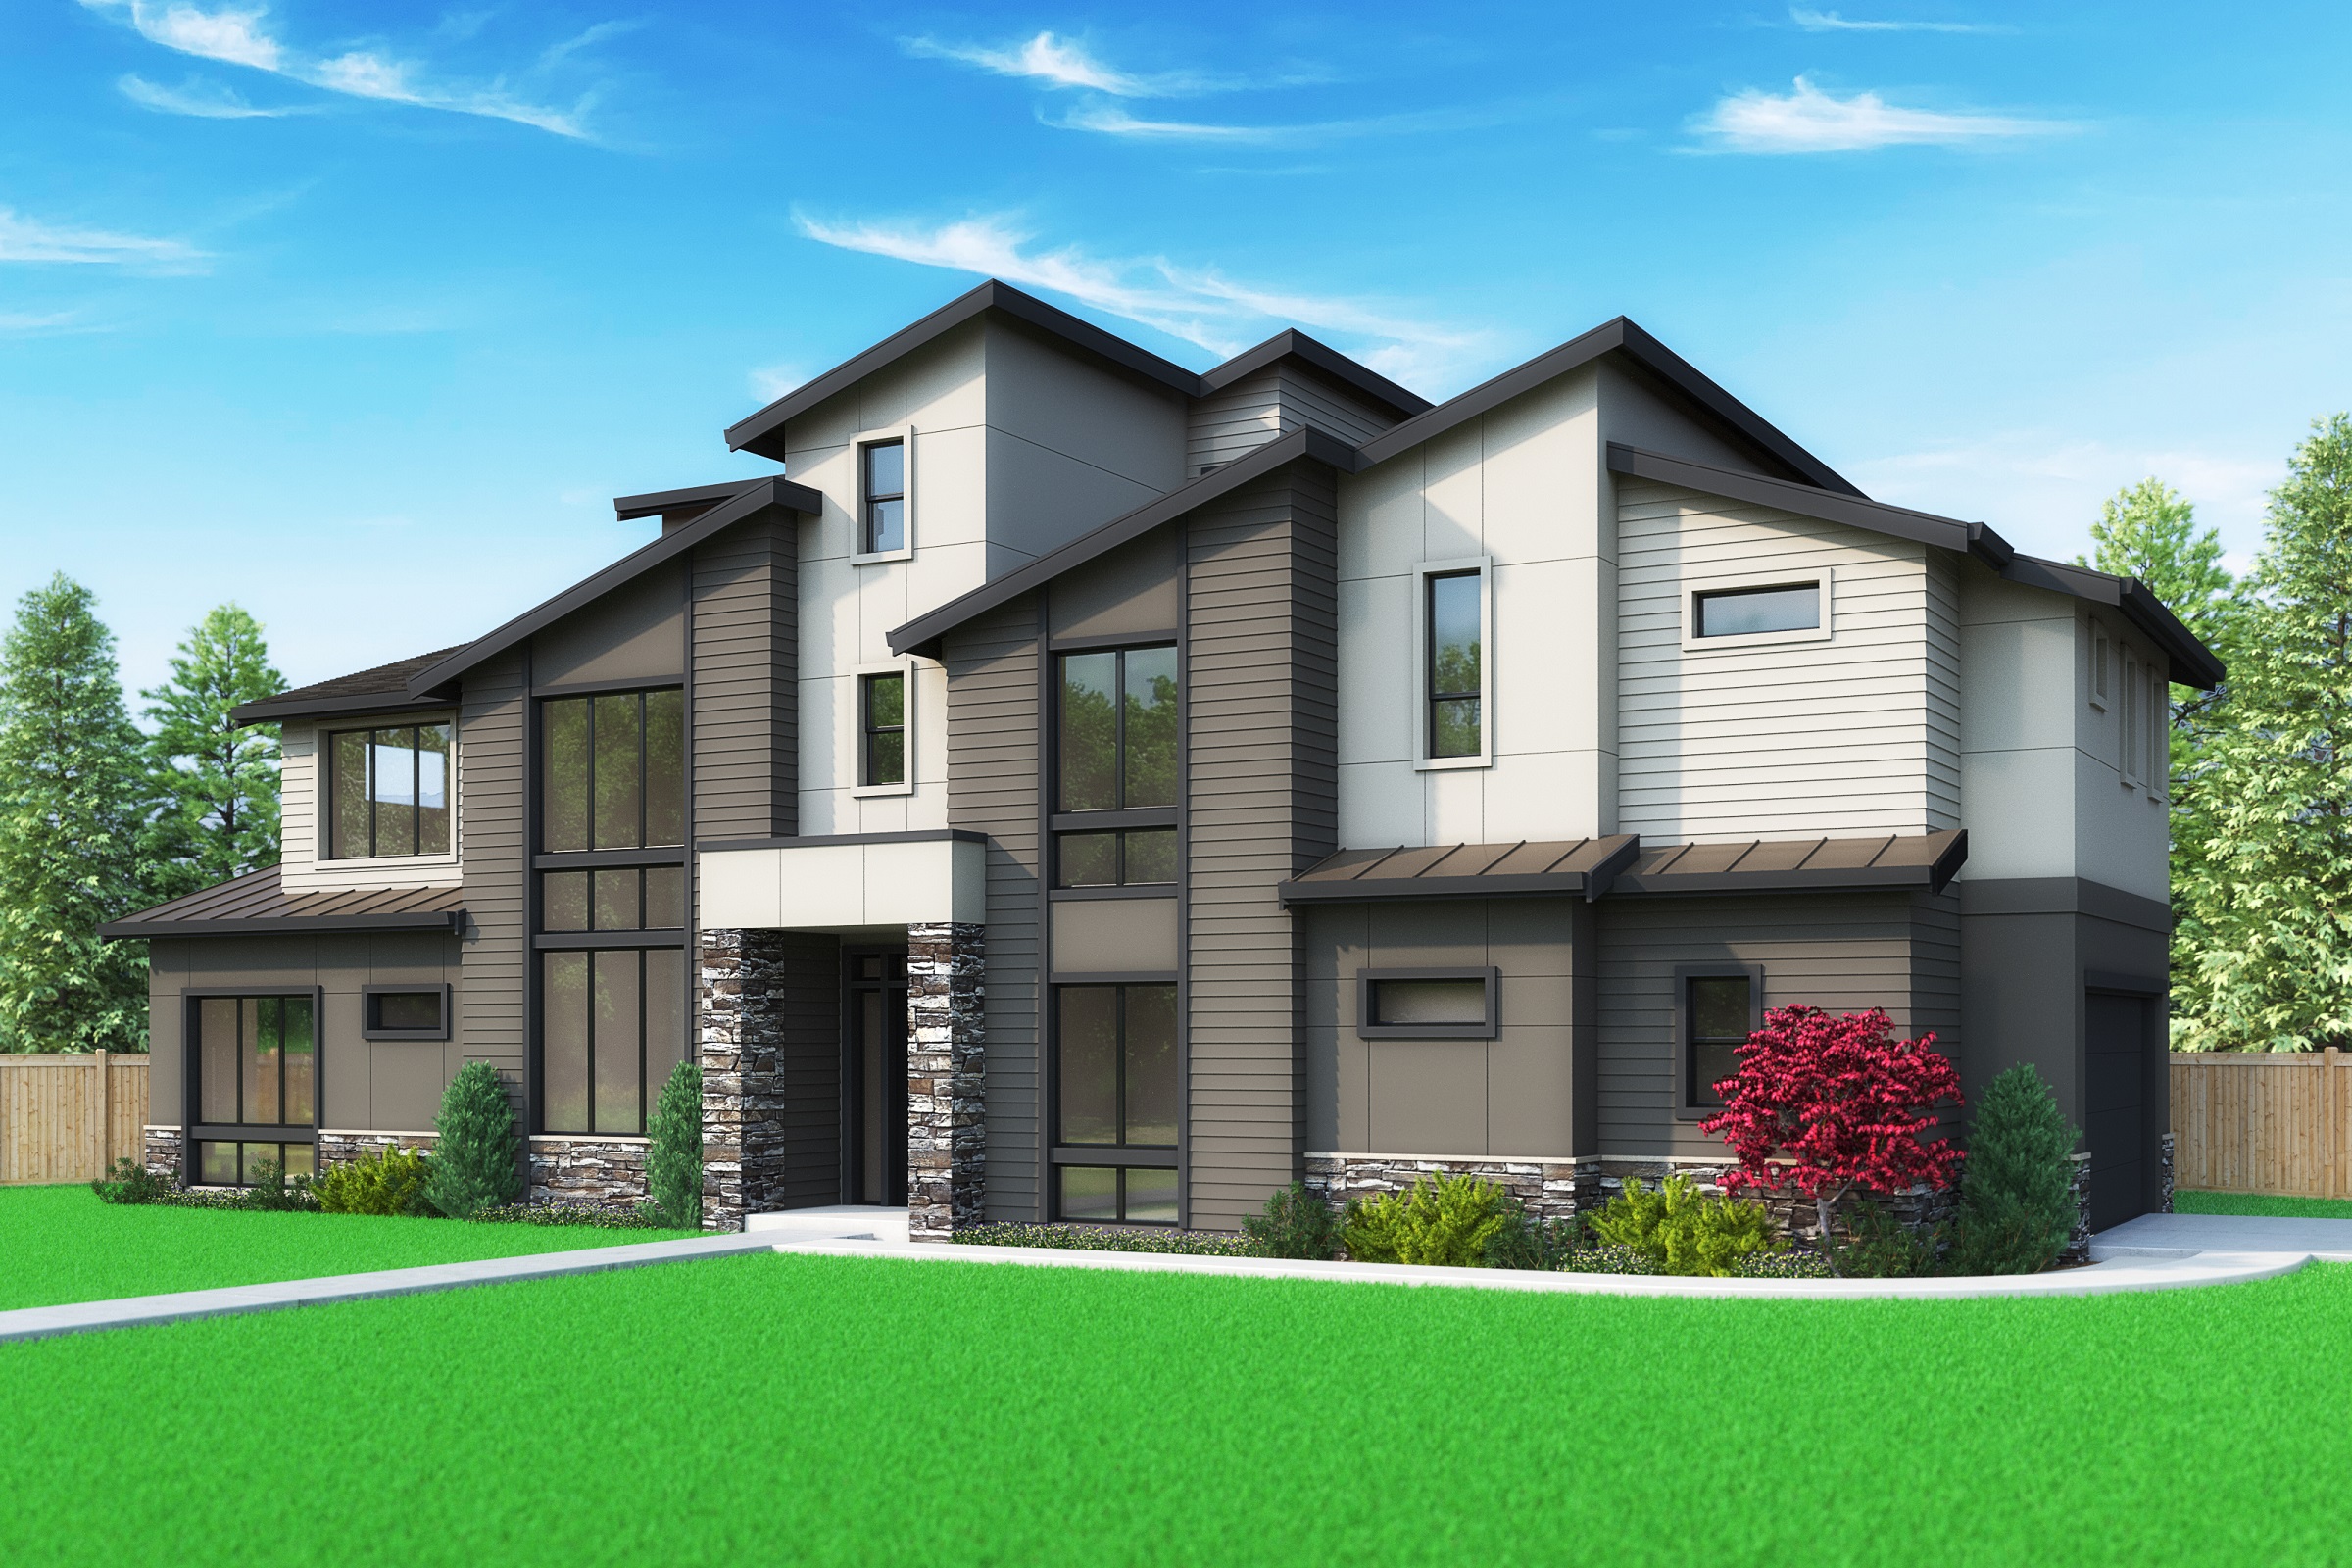 View our new luxury home construction on 14253 SE 14th St, in Bellevue, WA from MN Custom Homes